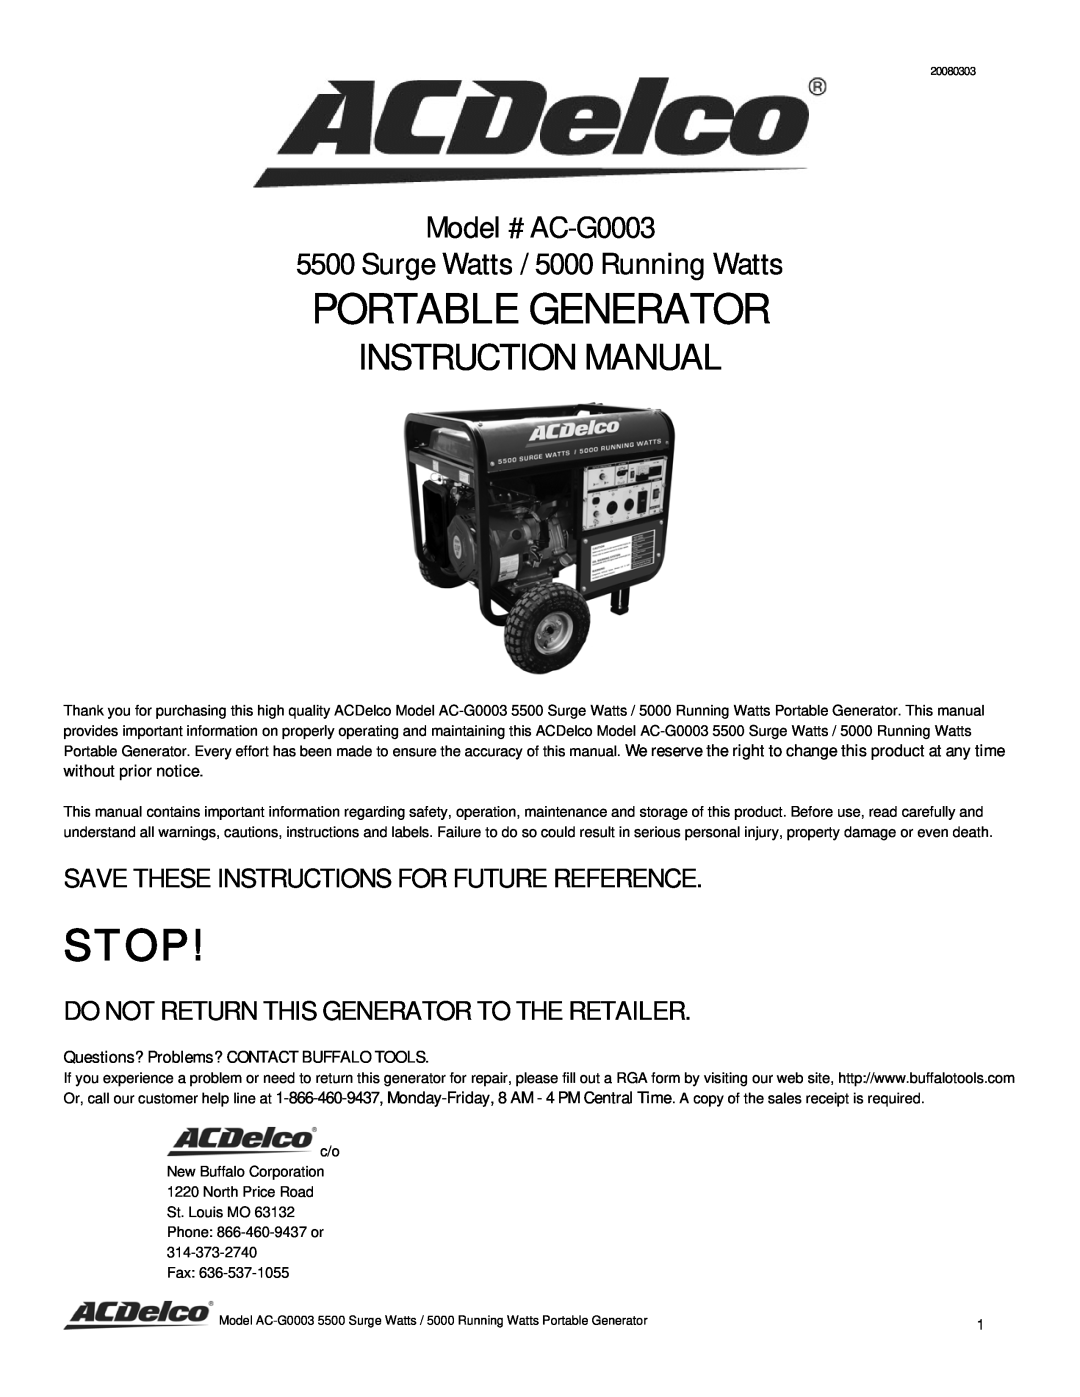 ACDelco AC-G0003 instruction manual Stop, Save These Instructions For Future Reference, Portable Generator 